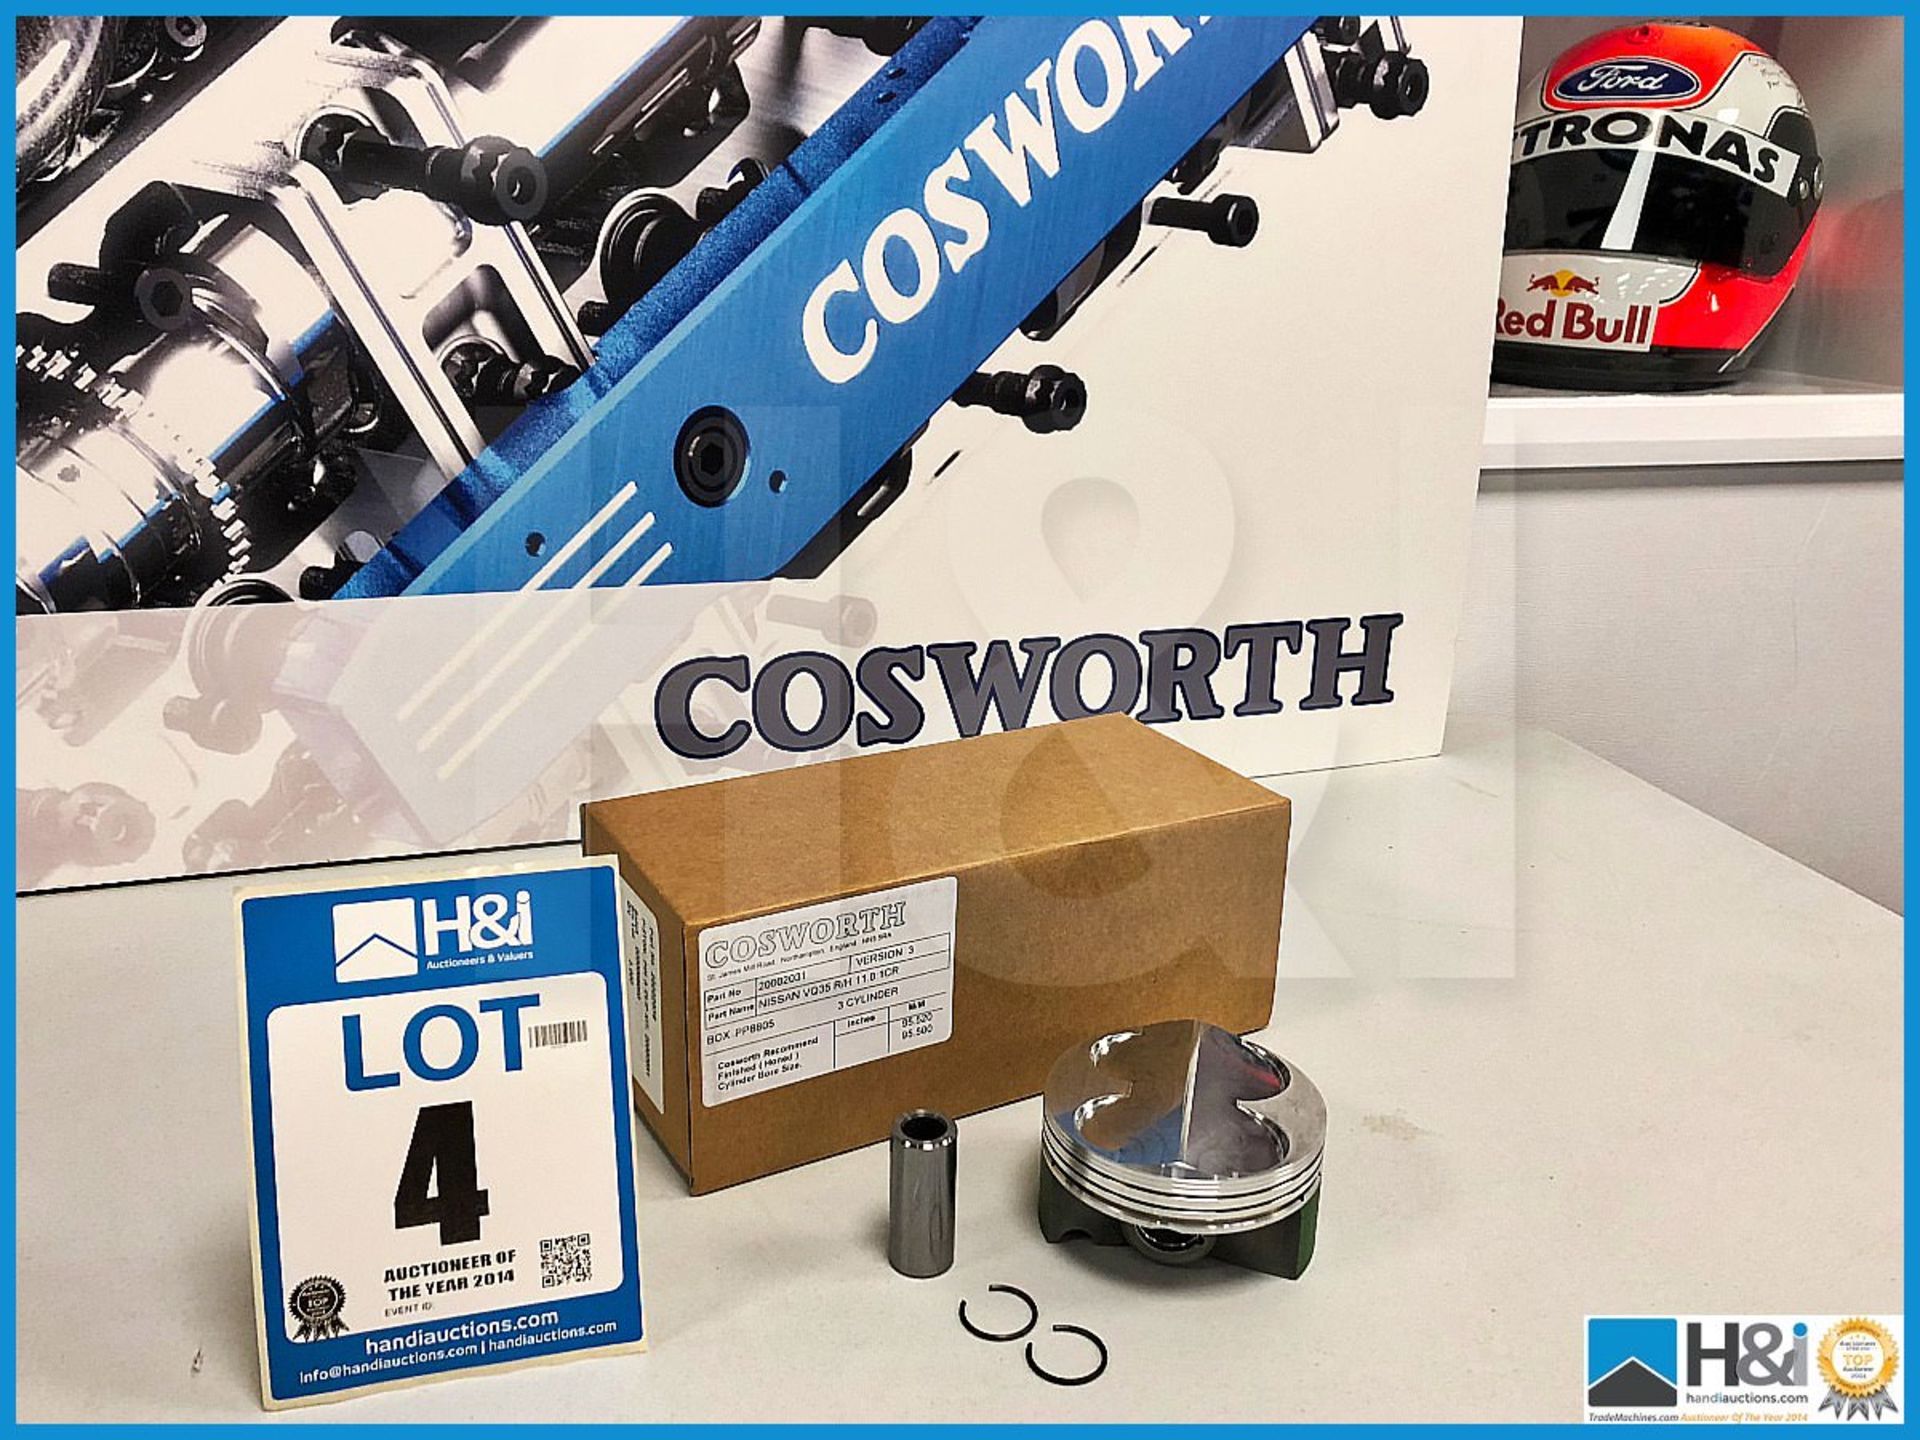 19 x Cosworth Nissan VQ35 piston, pin and clip kits. Approx RRP GBP 2,800